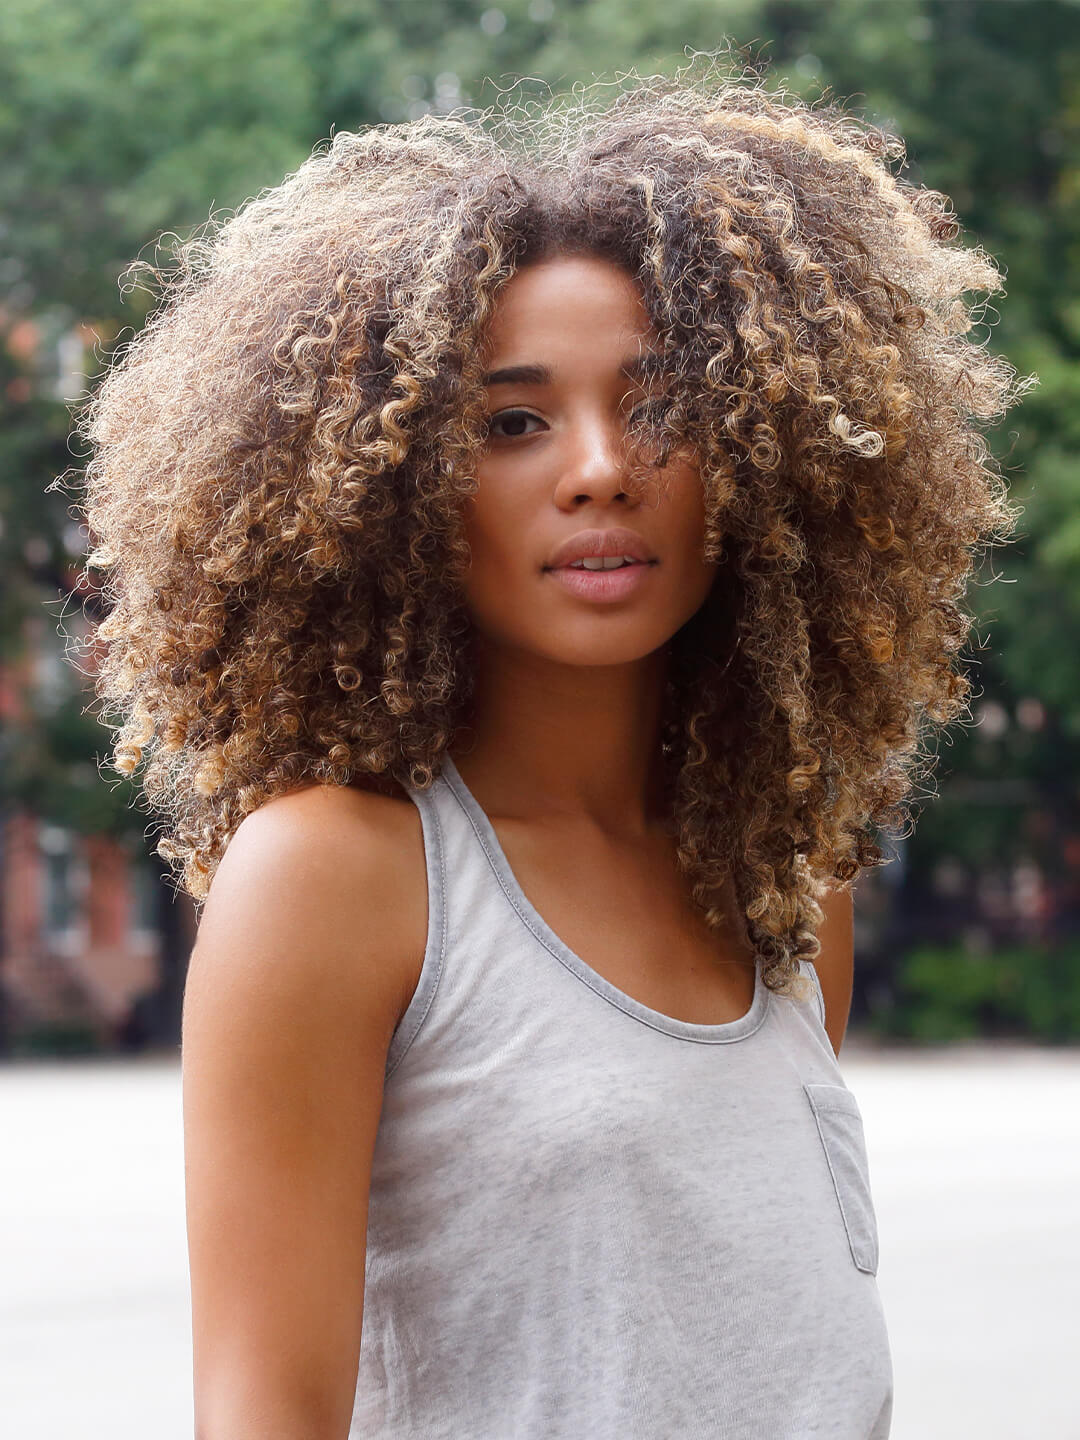 How to Grow Your Natural Hair, According to a Pro Hair Stylist | IPSY